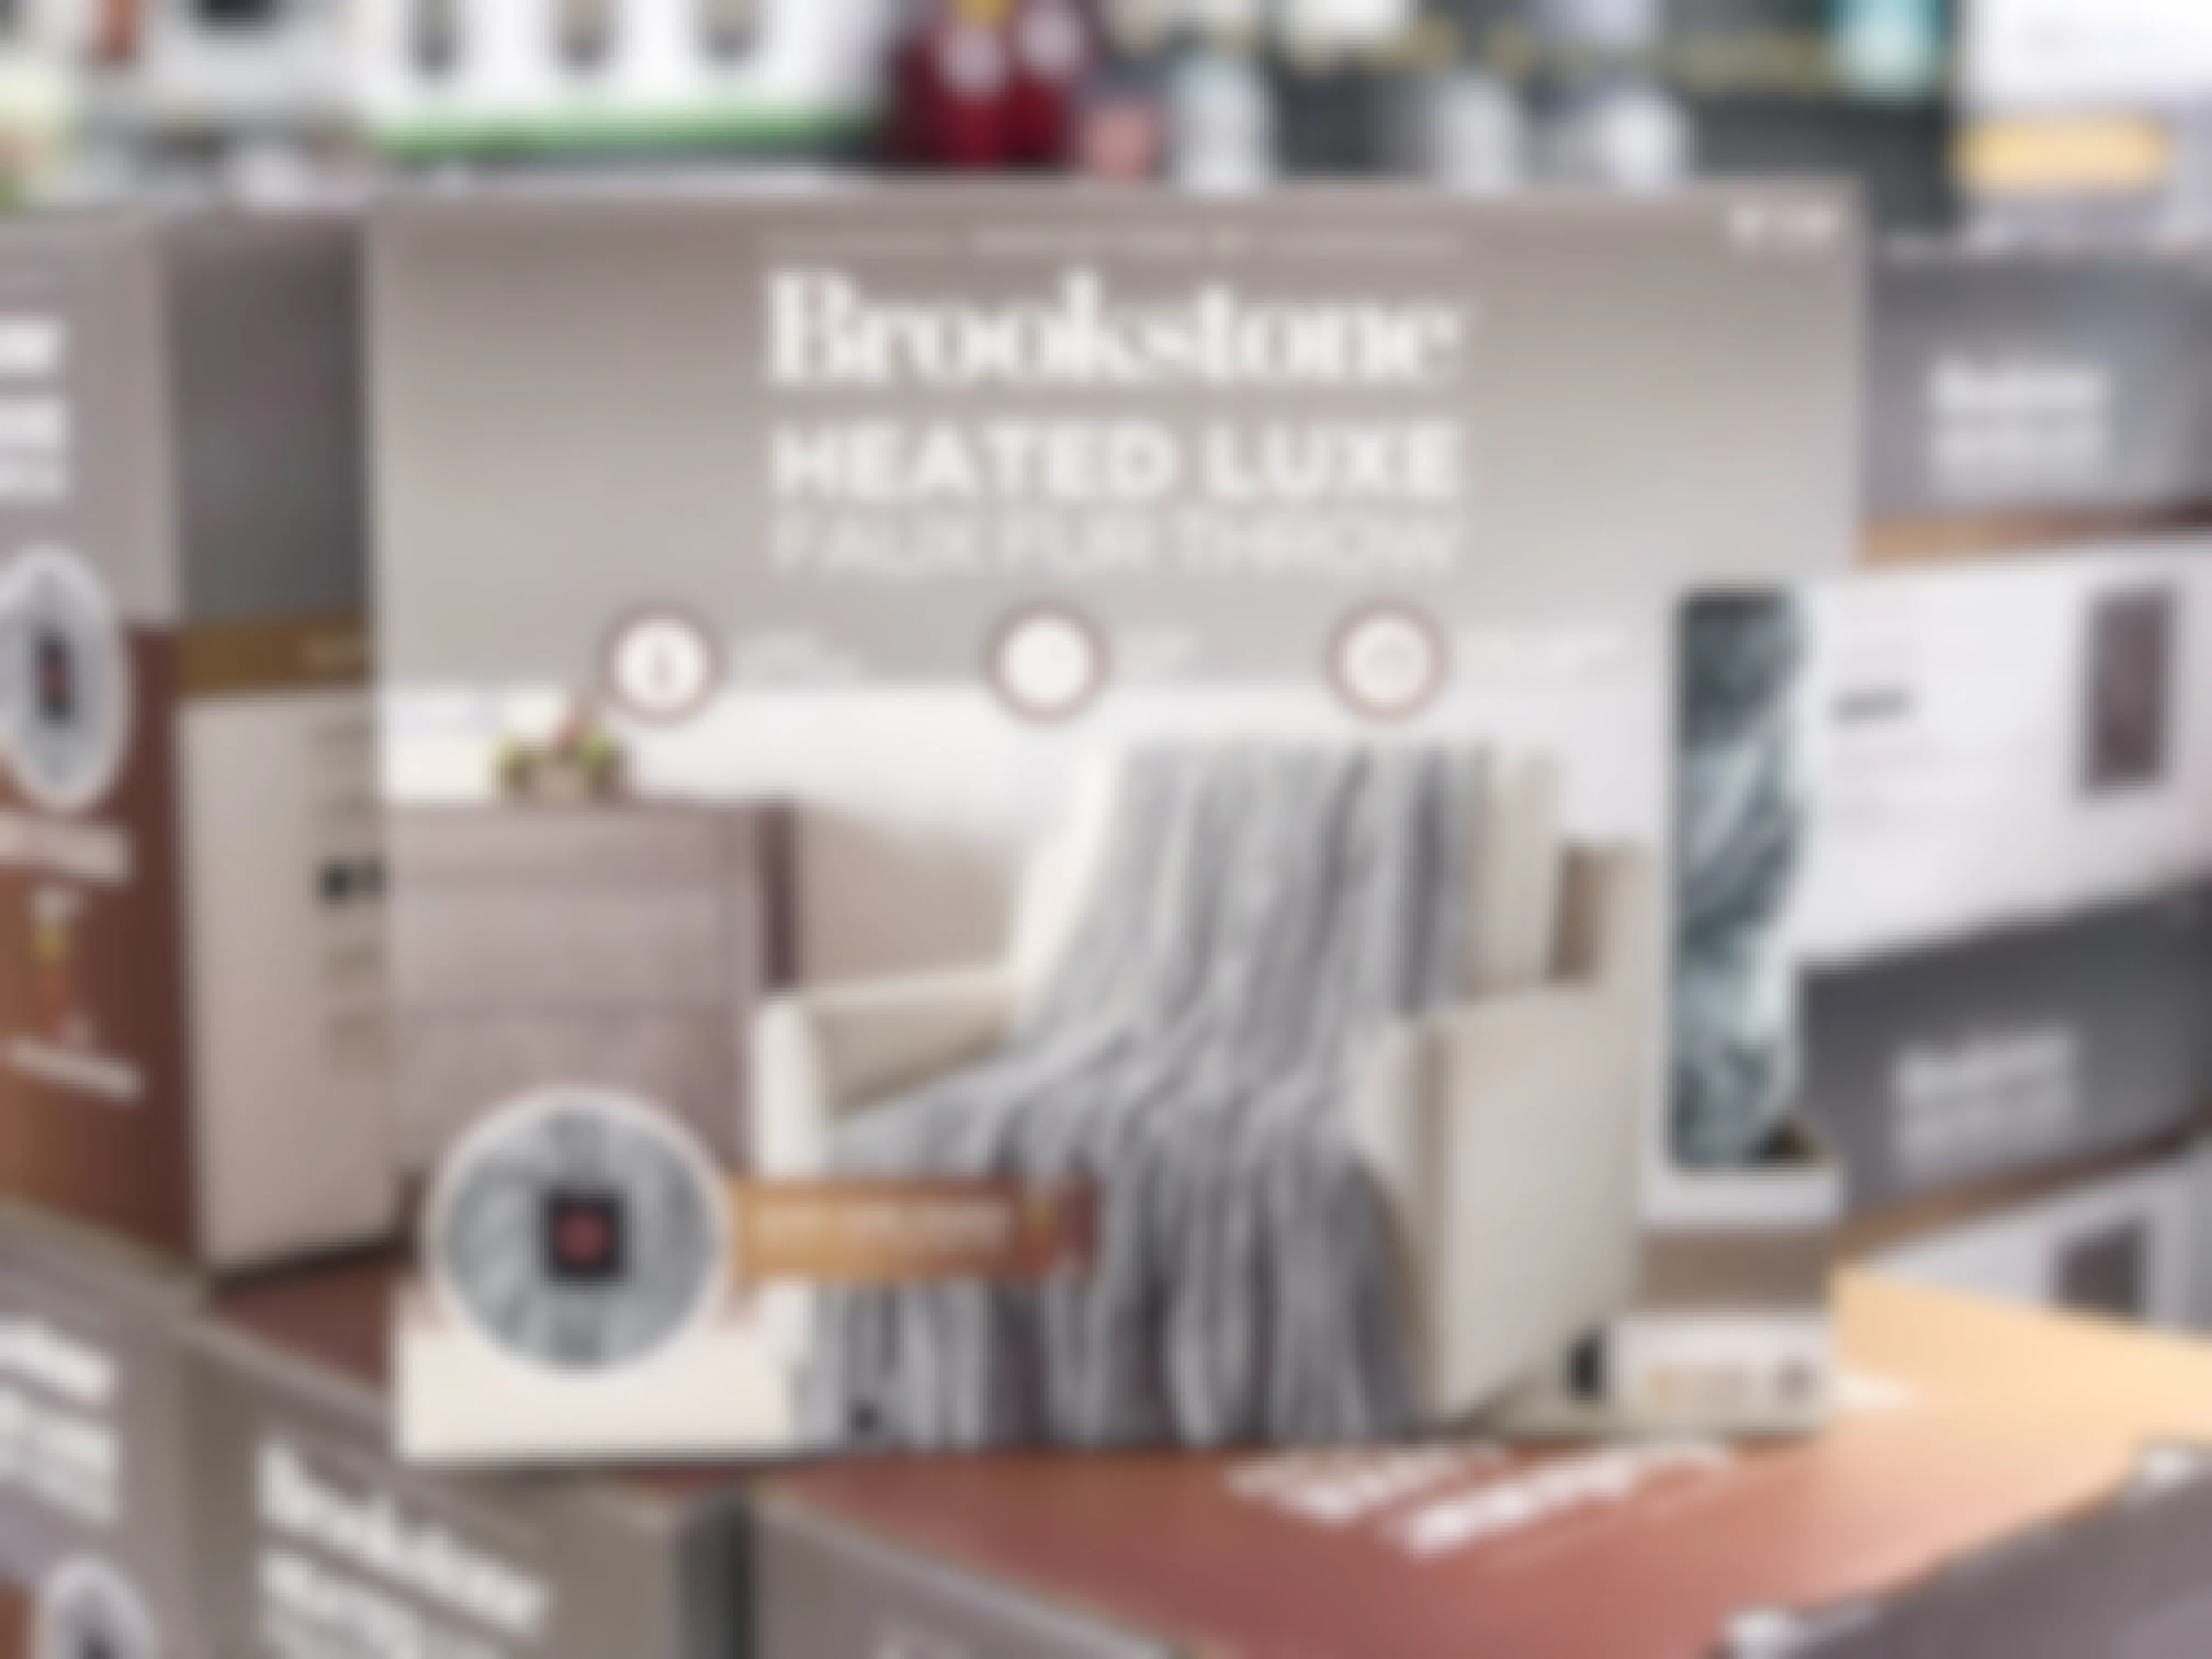 A Brookstone Heated Throw Blanket in its box on display at Walmart.